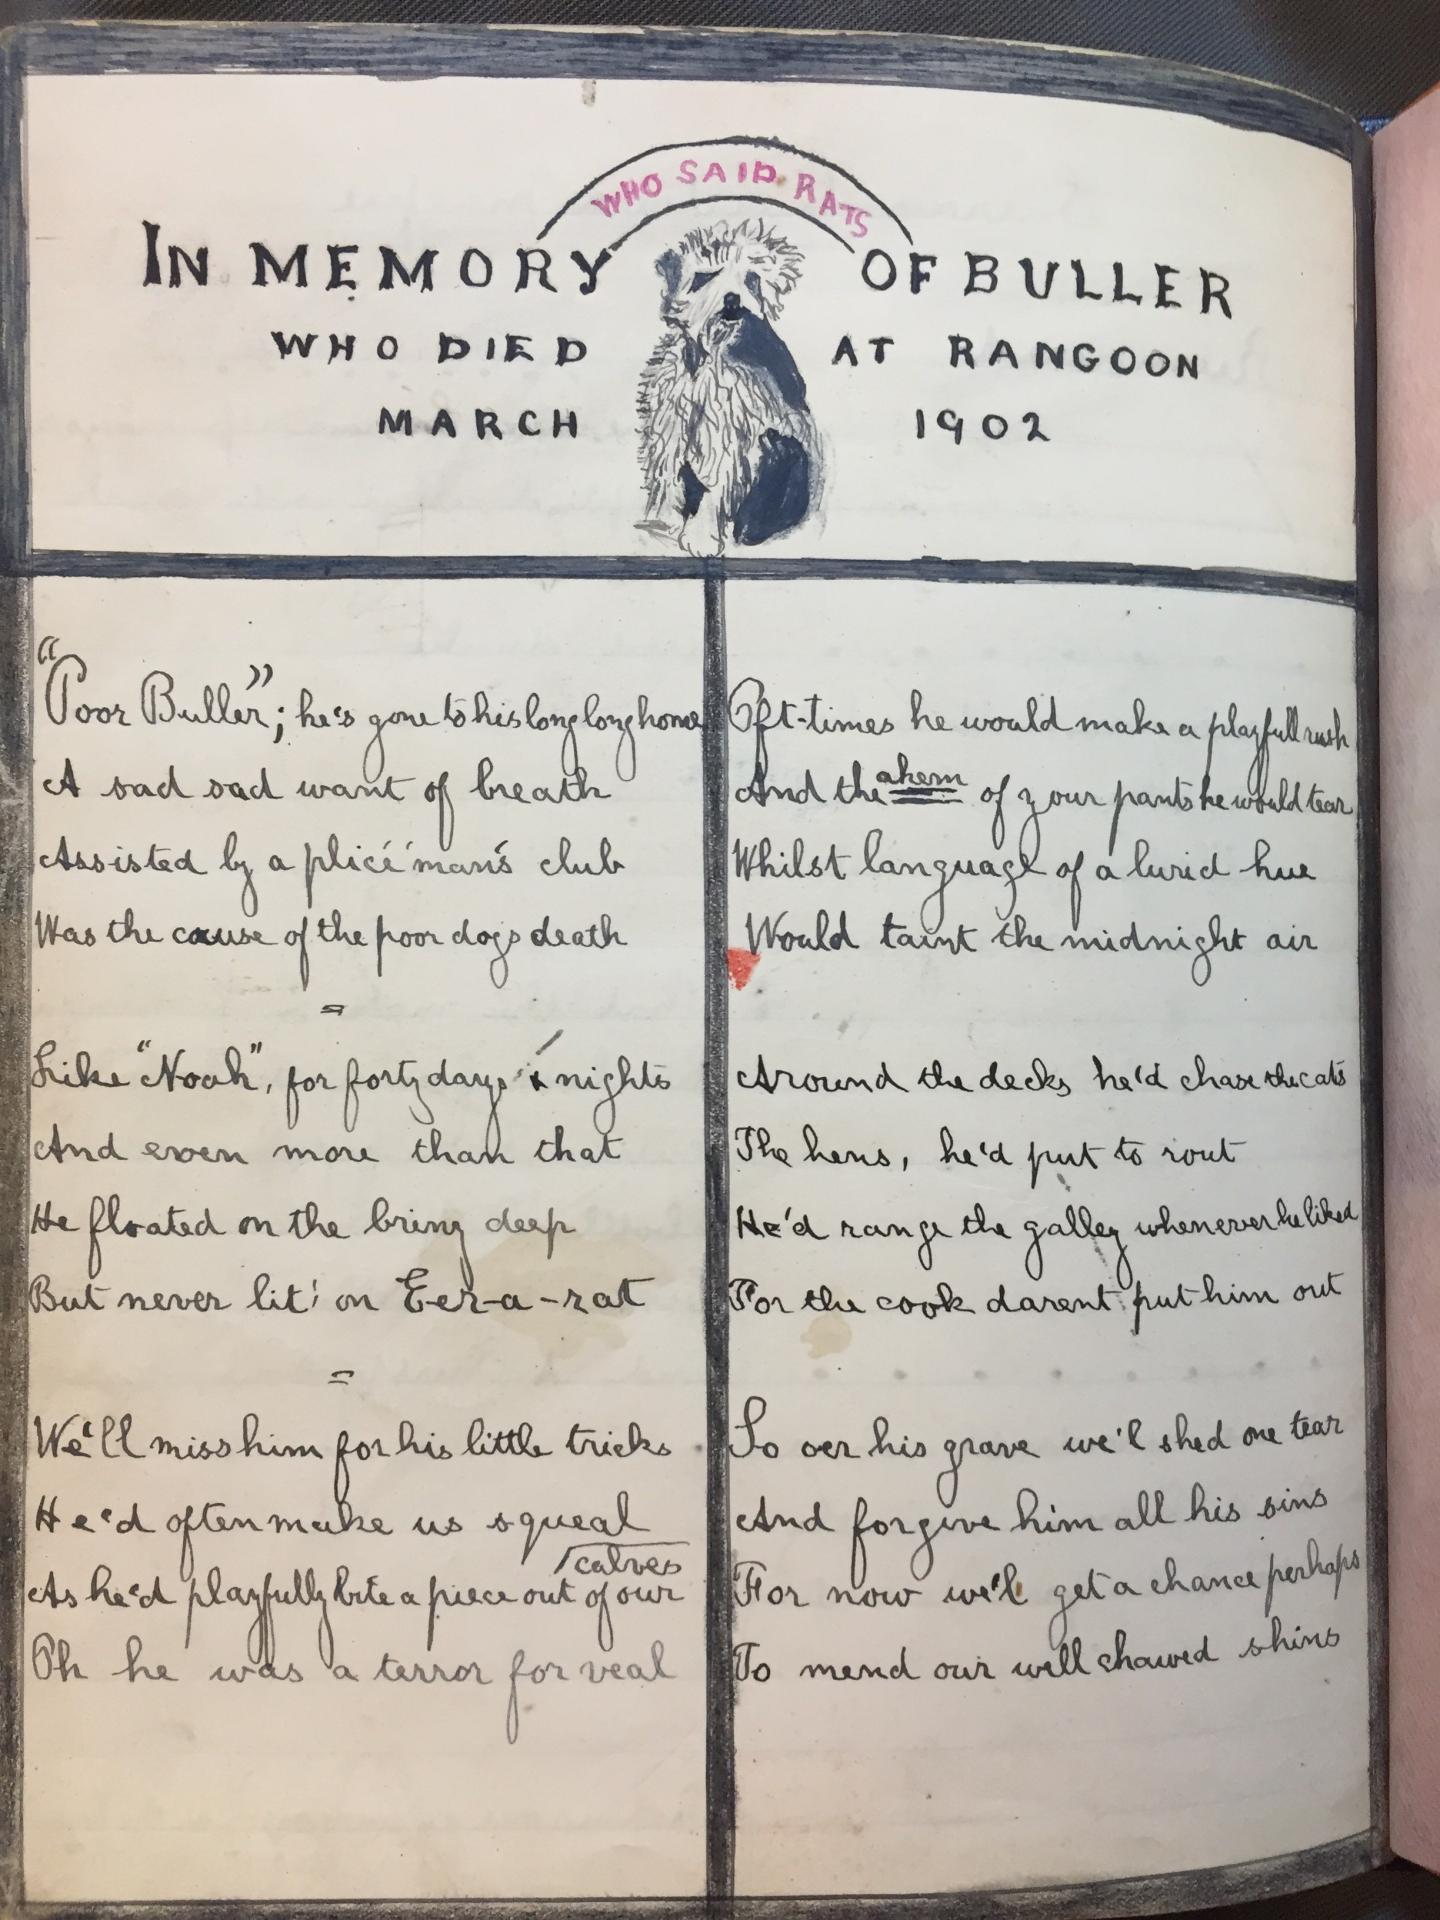 In memory of Buller who died at Rangoon, from the newspaper of the Sierra Cordova Magpie, March 1902 